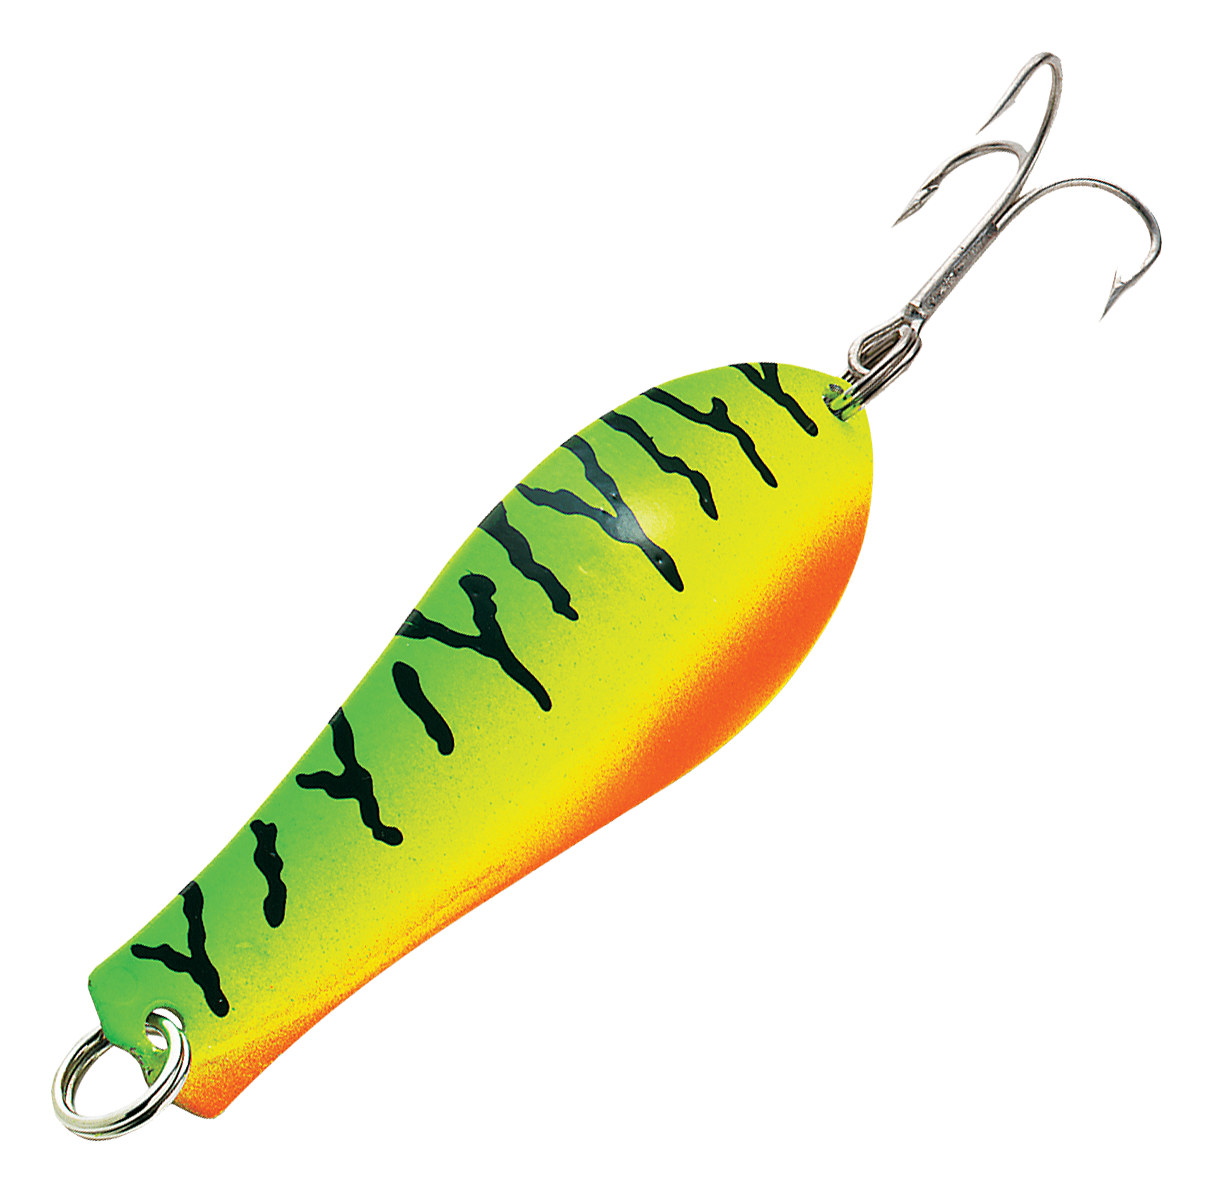 Doctor Spoon in (42) Perch - Yellow Bird Fishing Products